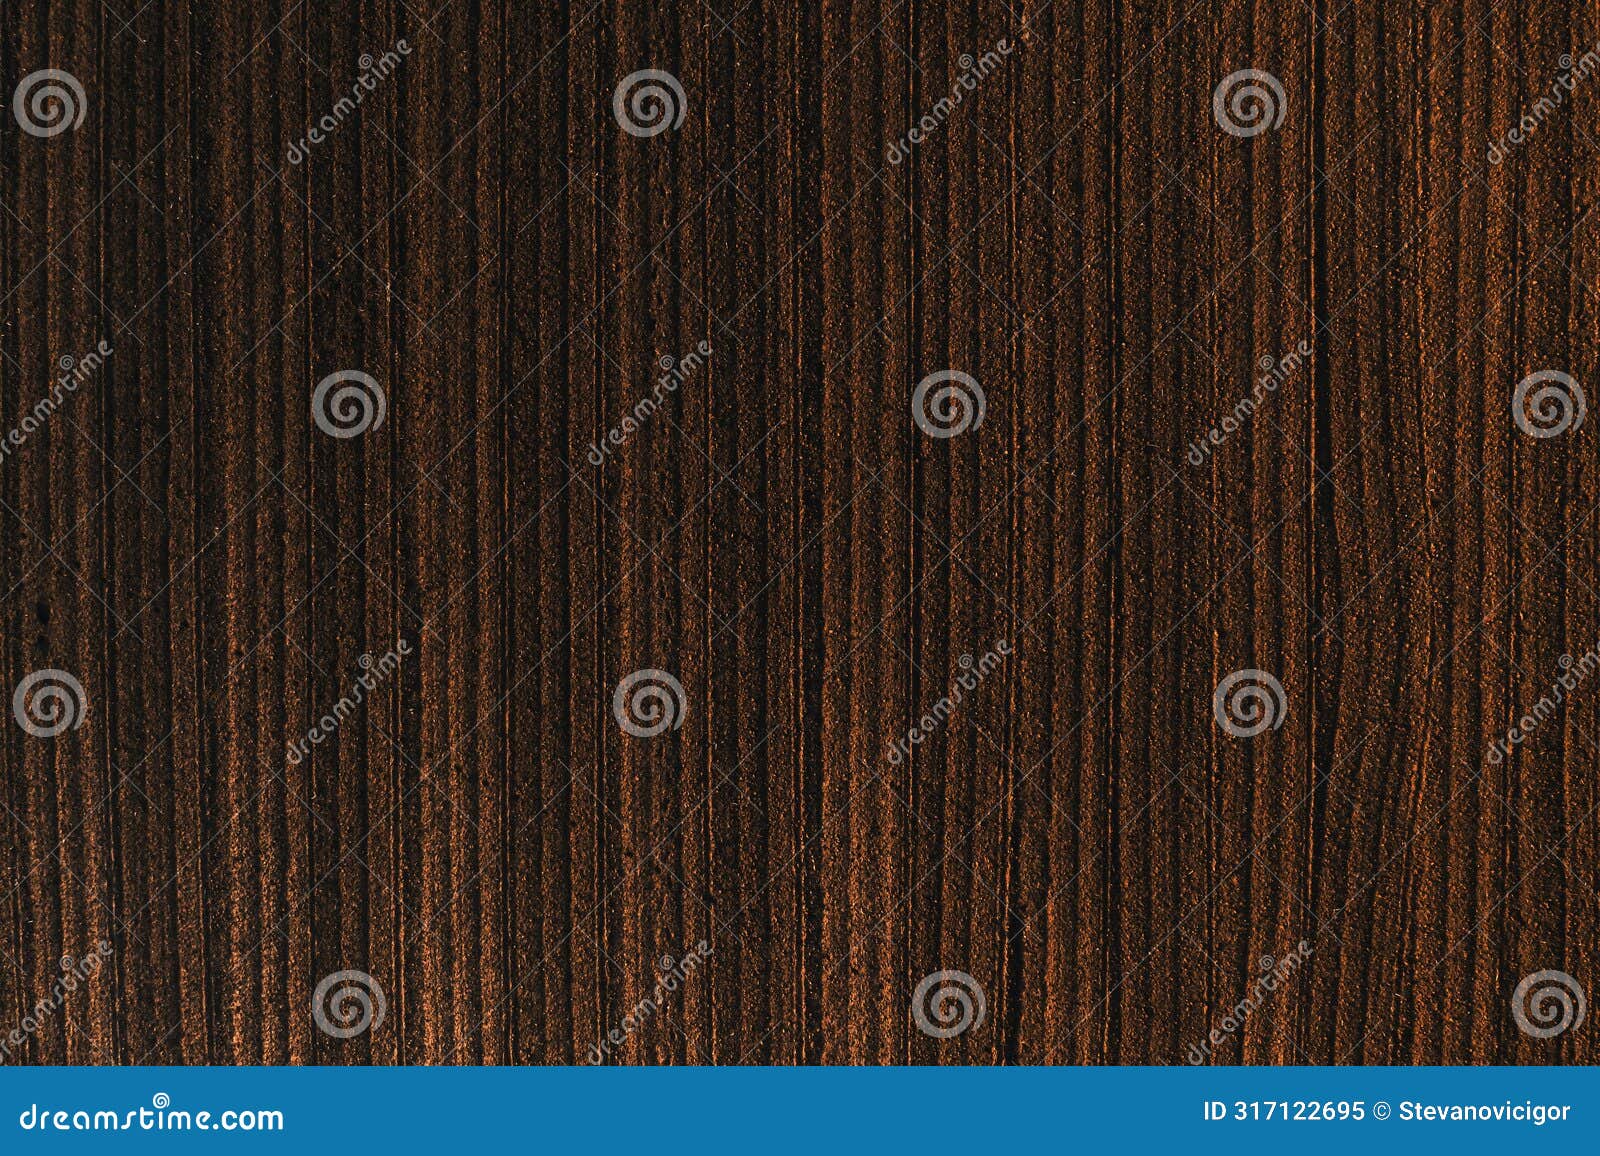 striped pattern of ploughed farmland soil from drone pov